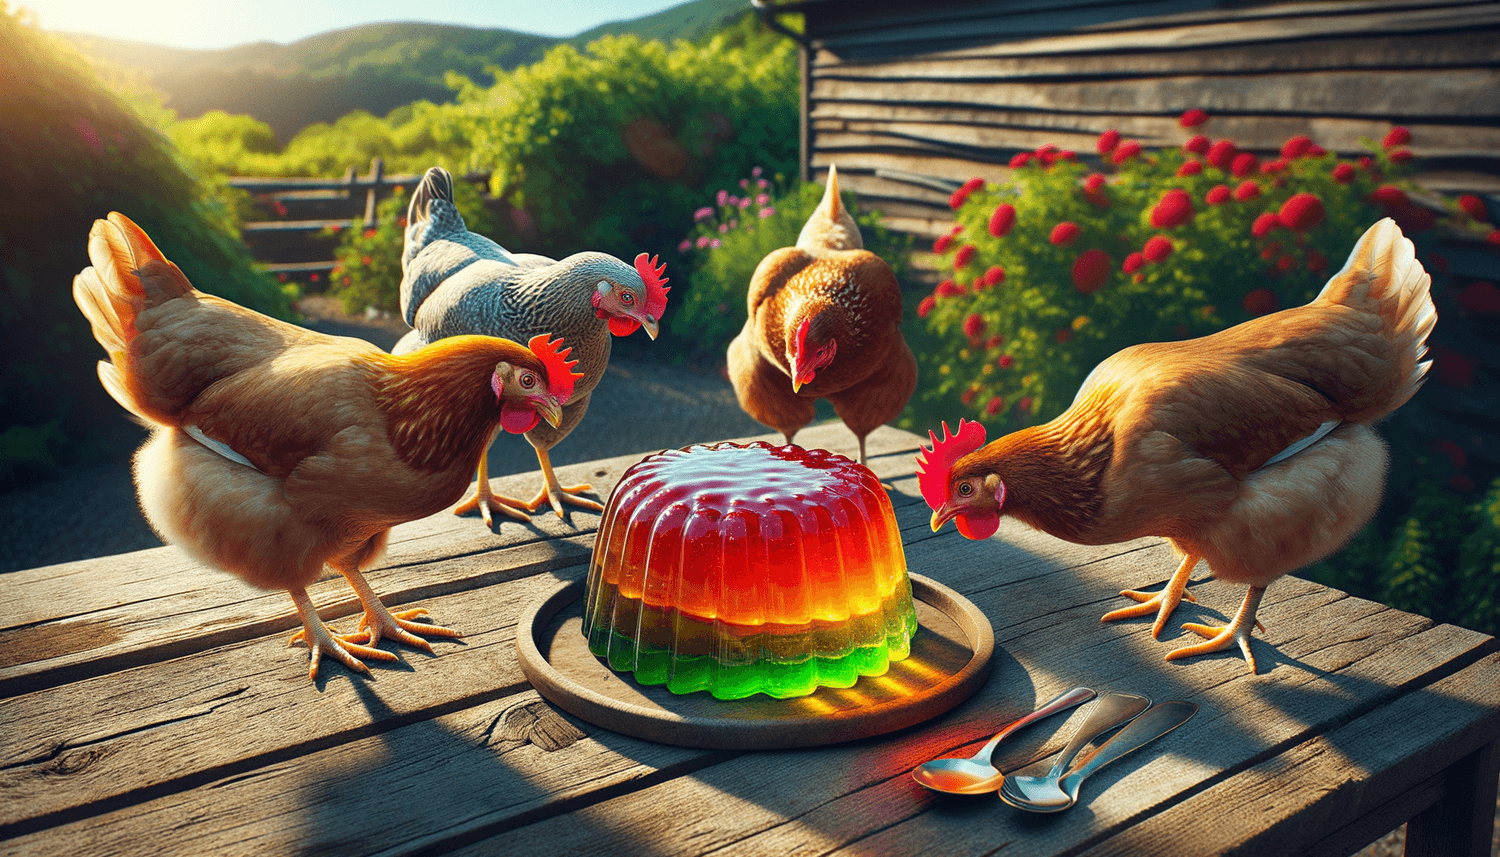 Can Chickens Eat Jelly?